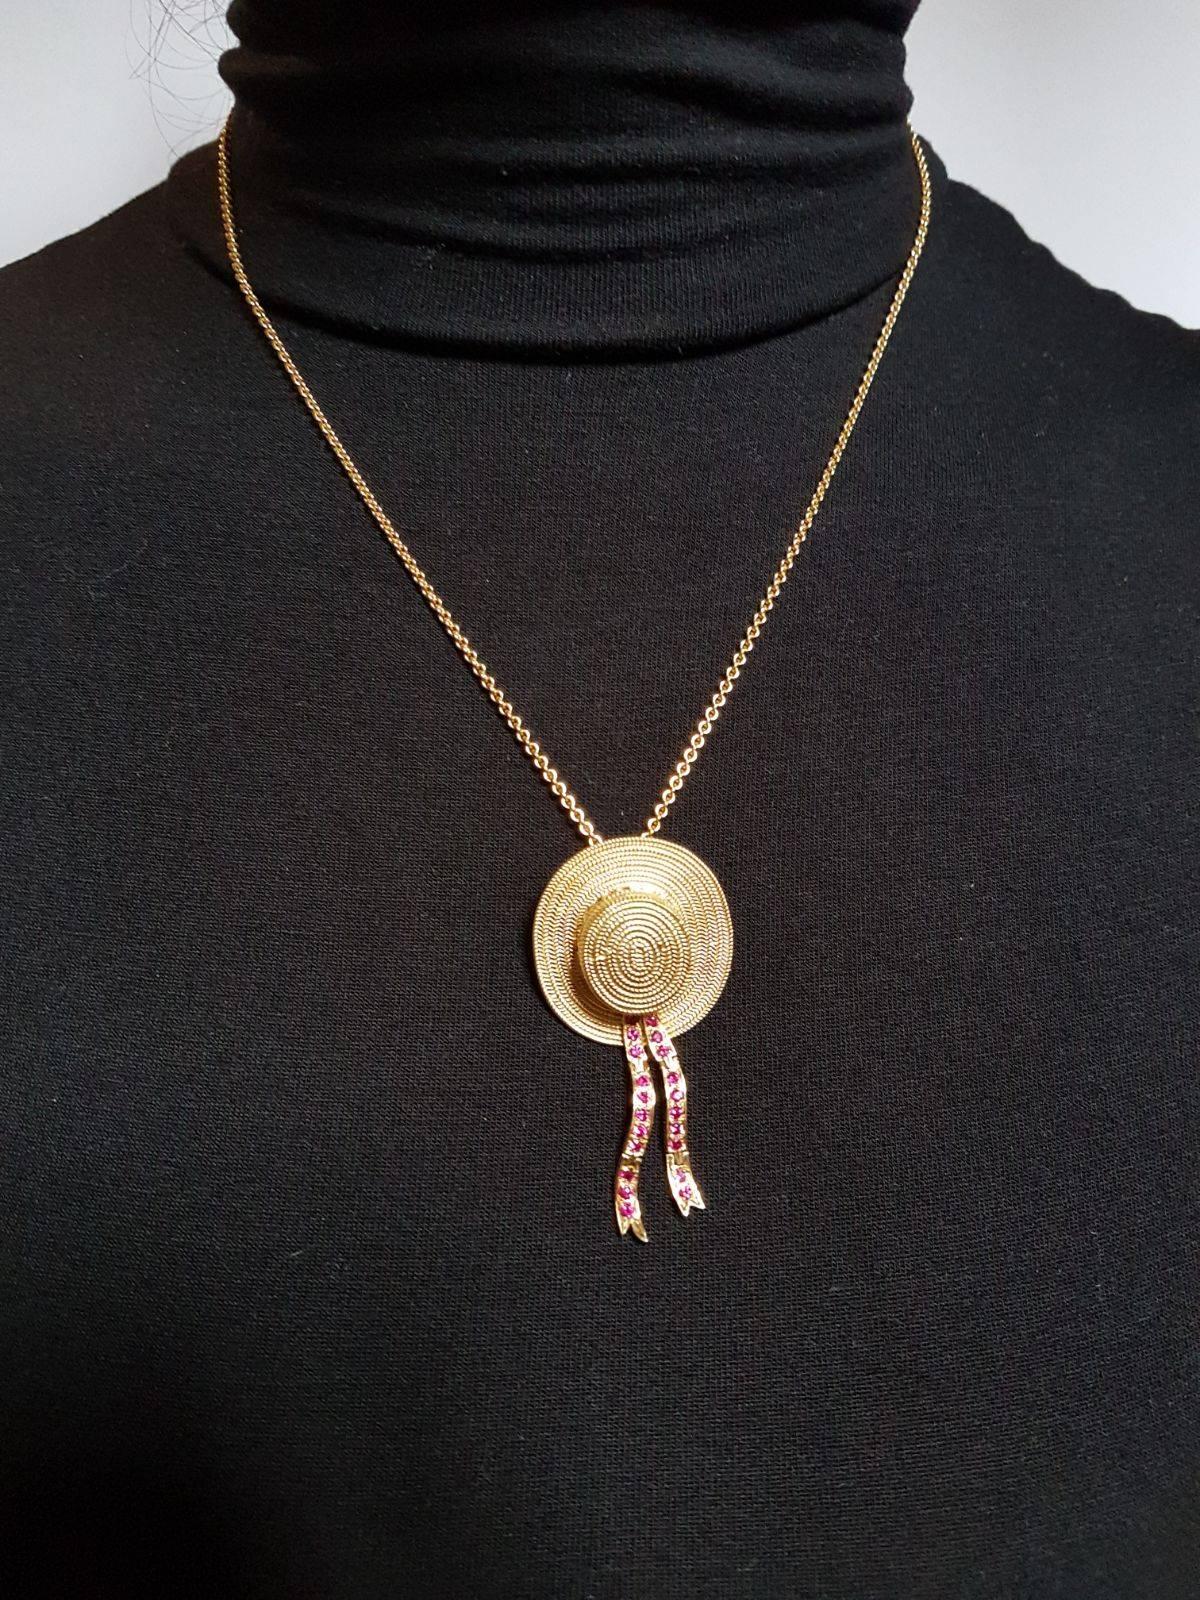 18 Karat Yellow Gold and Rubies Venetian Gondolier Hat Broach and Pendant For Sale 2